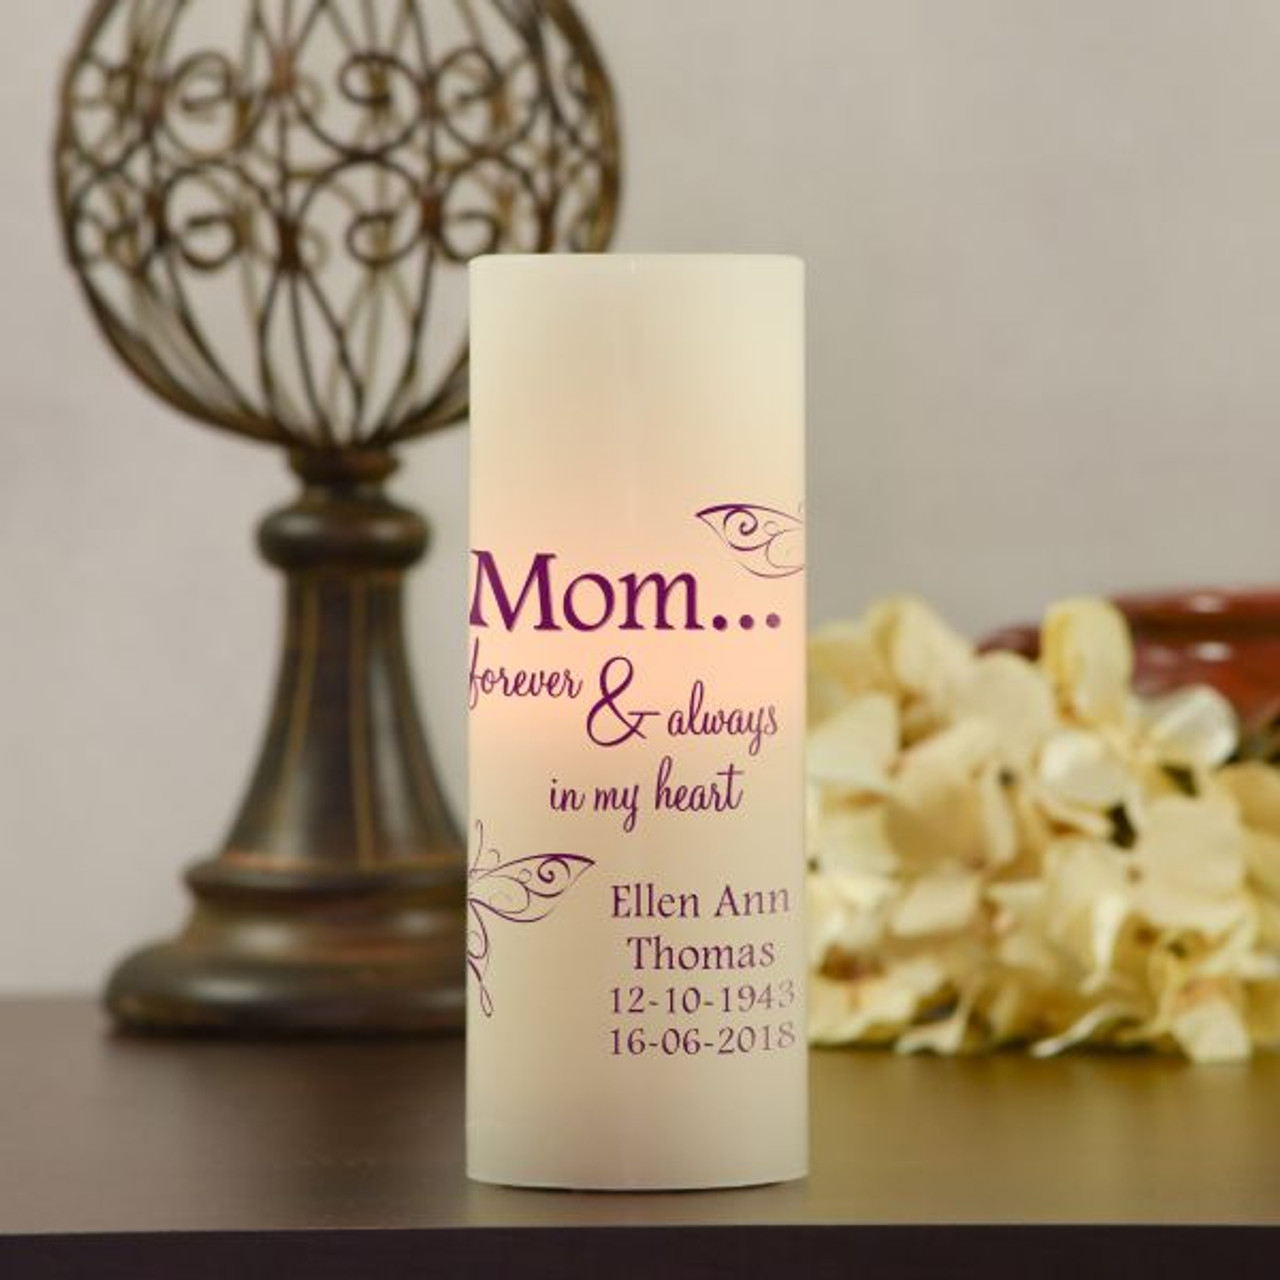 Because my Mom is in Heaven Loss of Mother Sympathy Candle - in Sympathy  Gifts